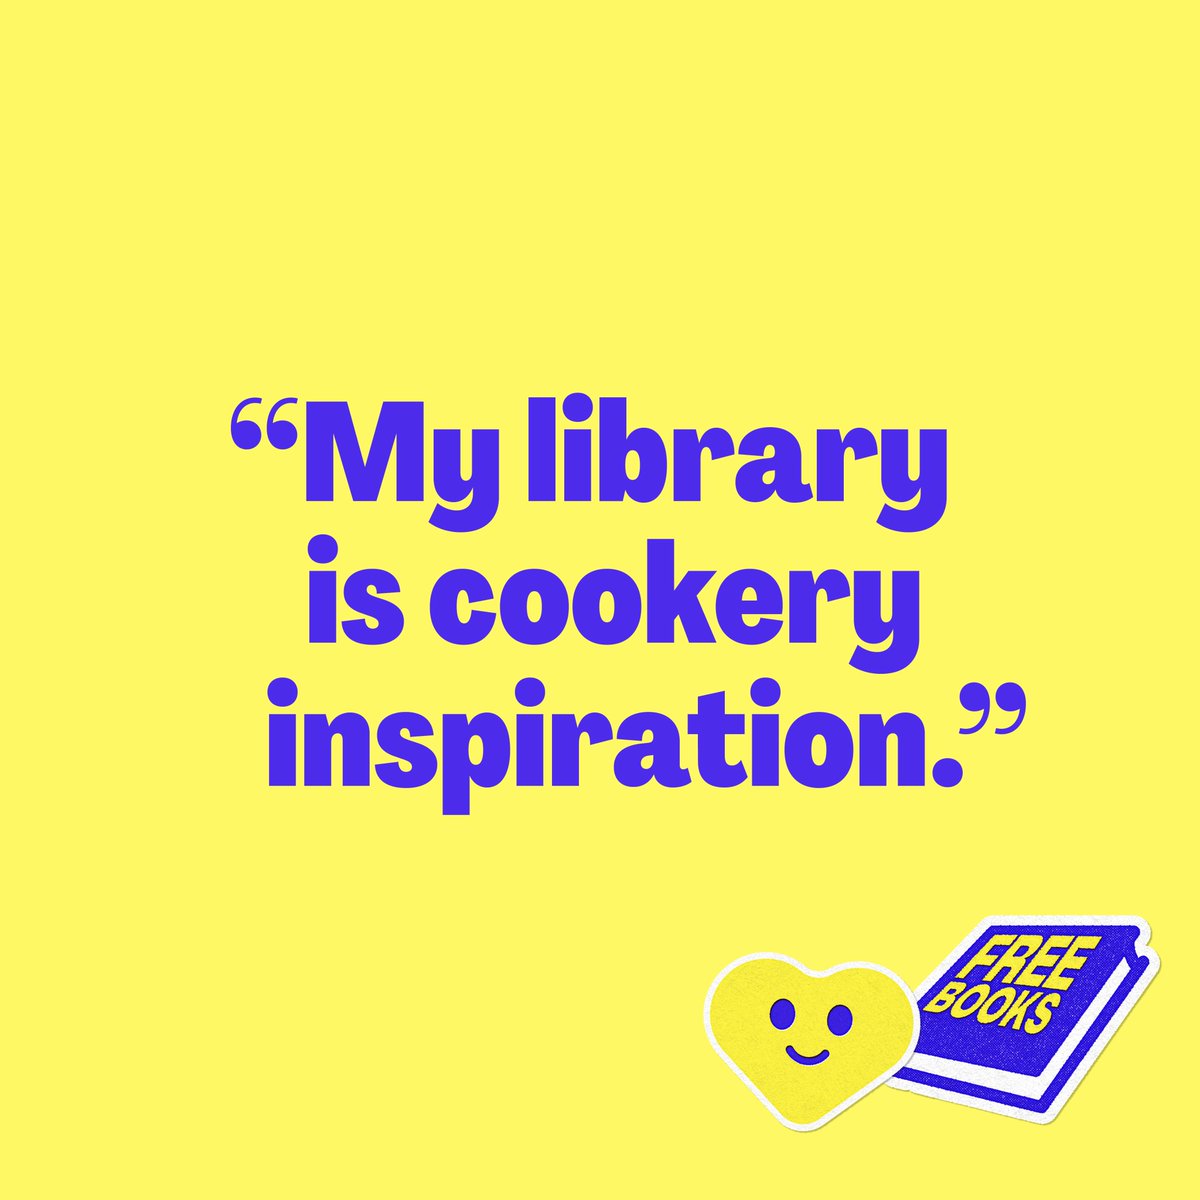 Cook books can be expensive but you can access hundreds for free with your library card. Try a different recipe each week, find new, quick, go to meals or get creative with your microwave! Discover your #Cookery inspiration today! 🥘🍽️🥟 bit.ly/BHPublicCatalo… #EveryonesLibrary